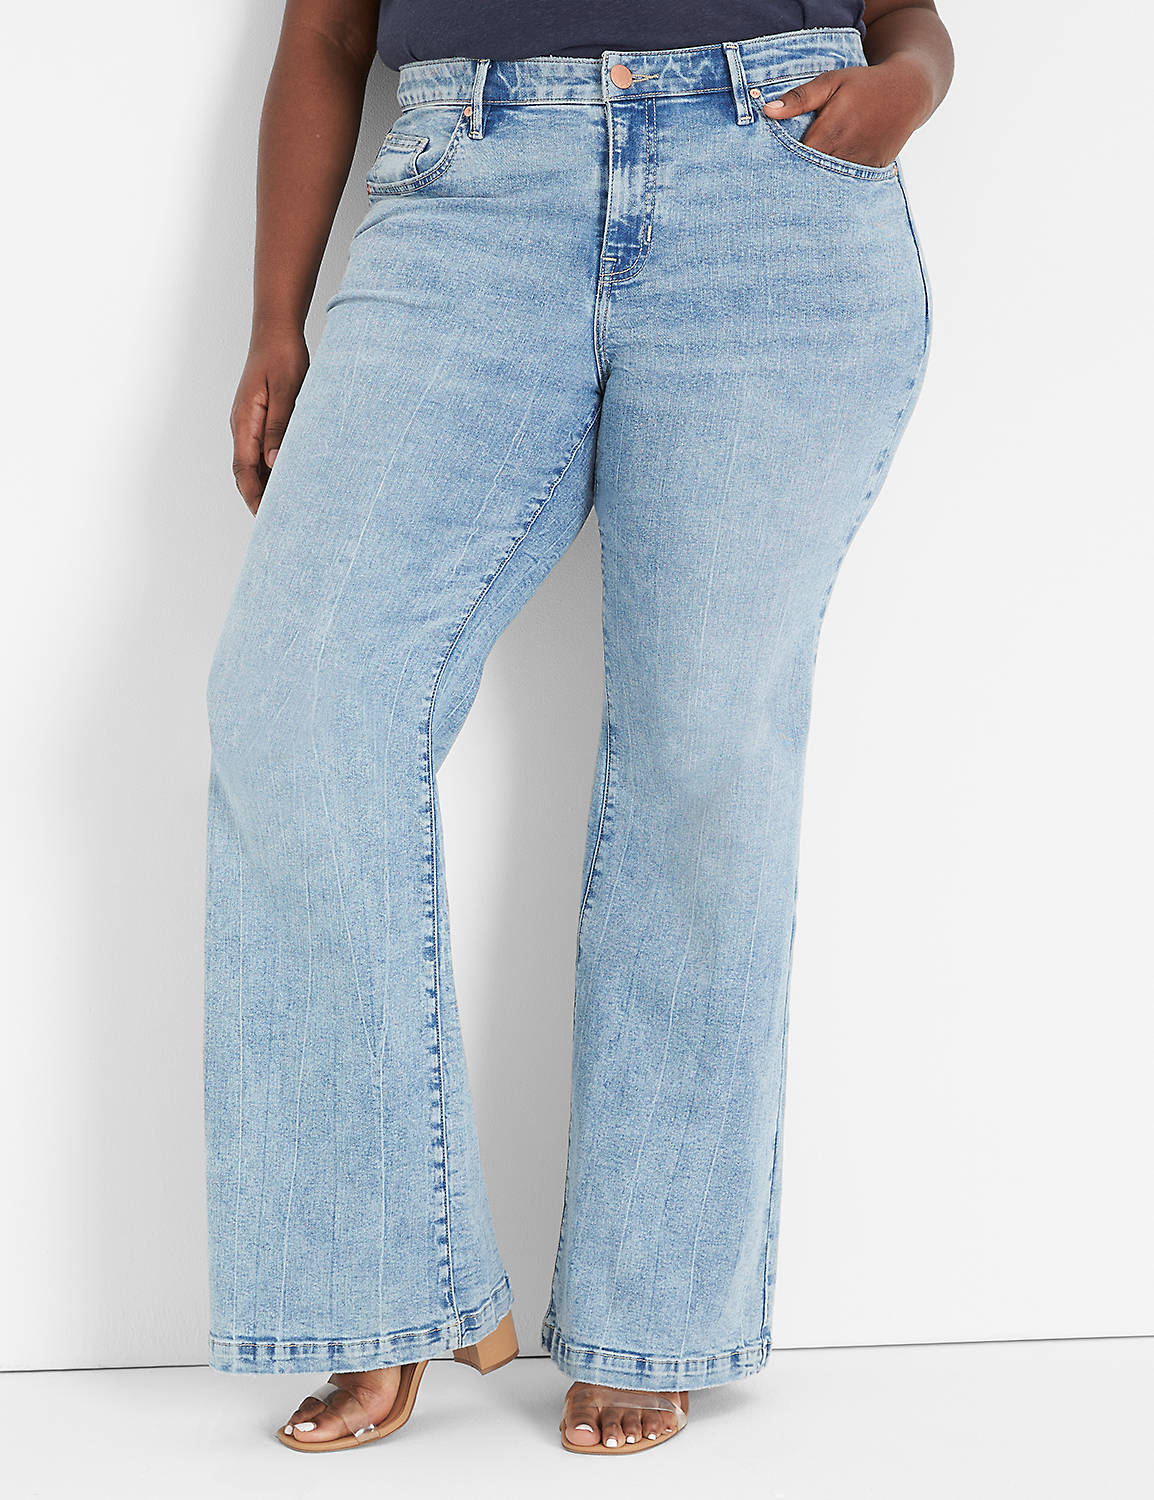 SIGNATURE FIT MID RISE BOOT JEAN  - Product Image 1